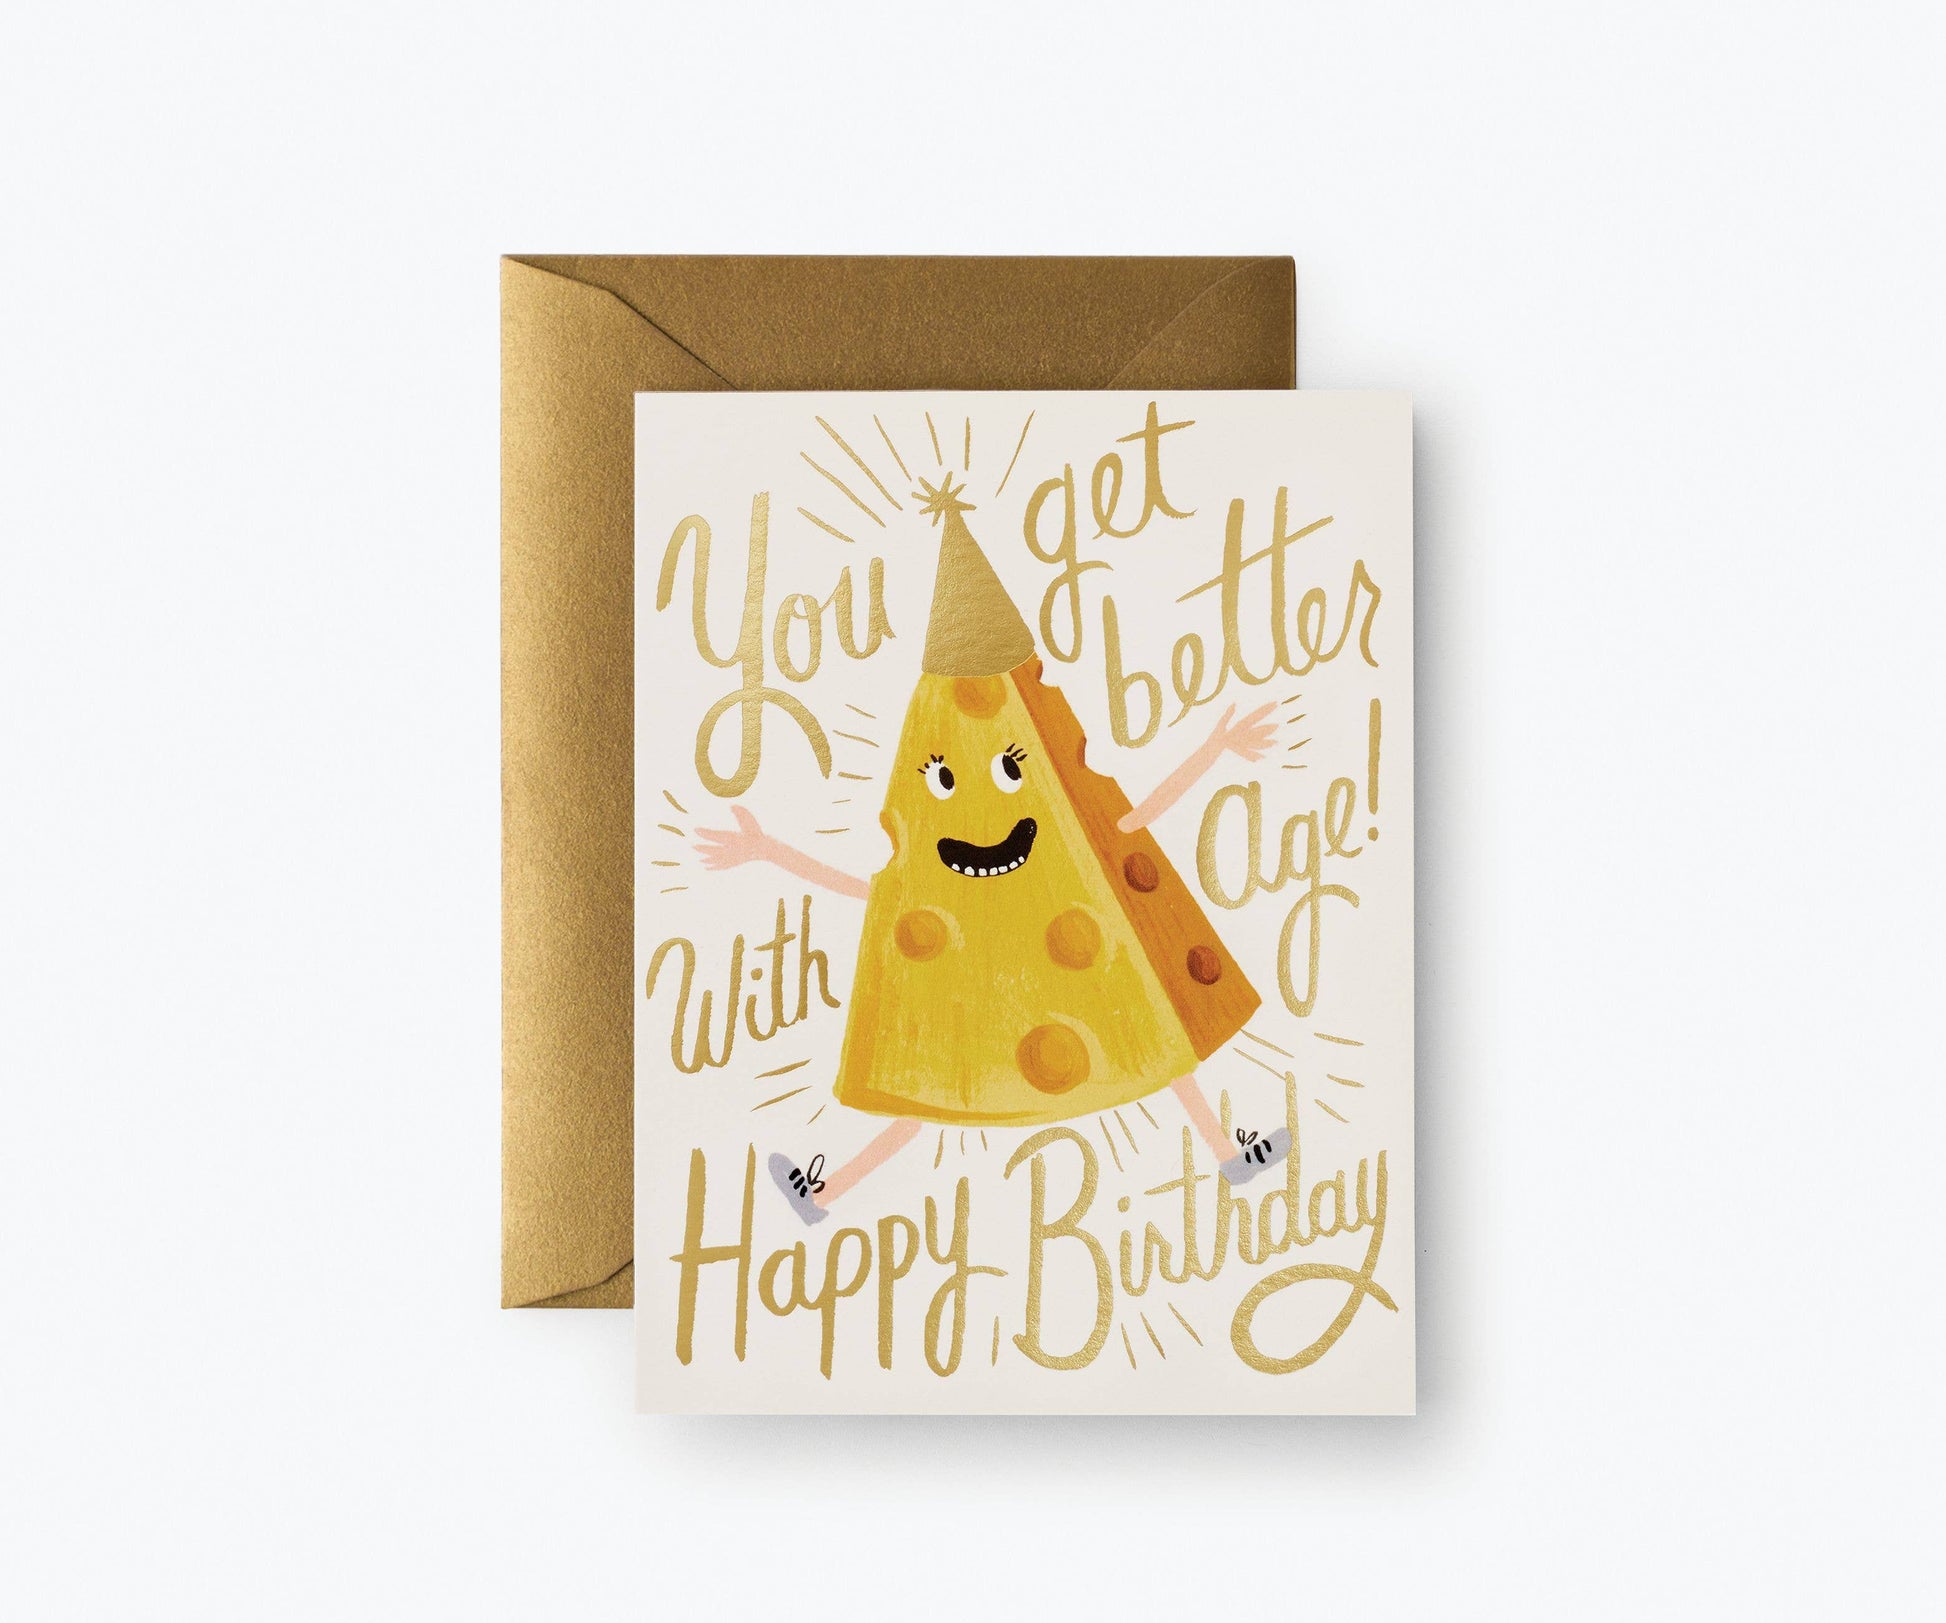 Birthday card with illustration of a happy wedge of cheese wearing white sneakers and a pointy gold birthday hat. Text reads "You get better with age! Happy Birthday!"